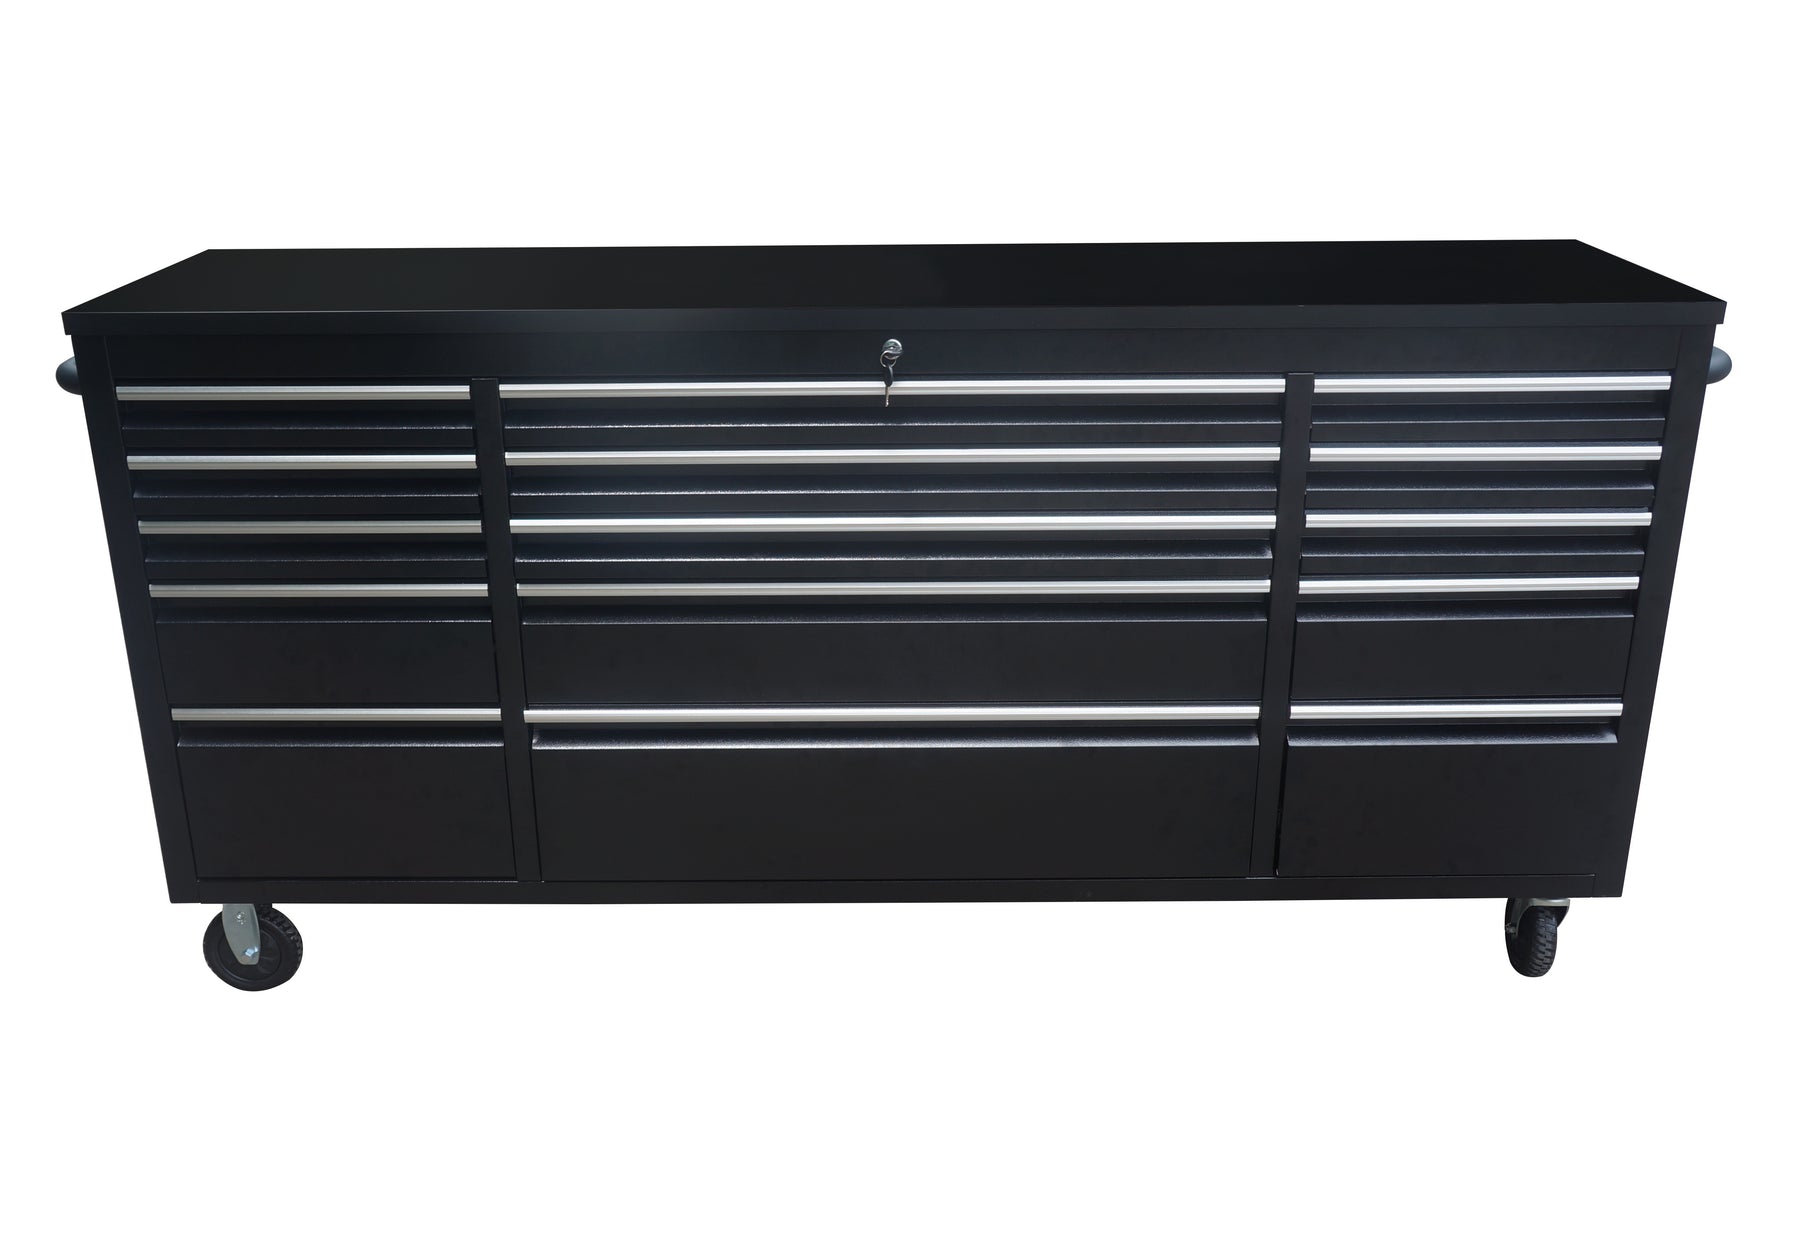 Fobest 72in 15 Drawers Mobile Black Tool Chest with Rubber Wood Top - Fobest Appliance